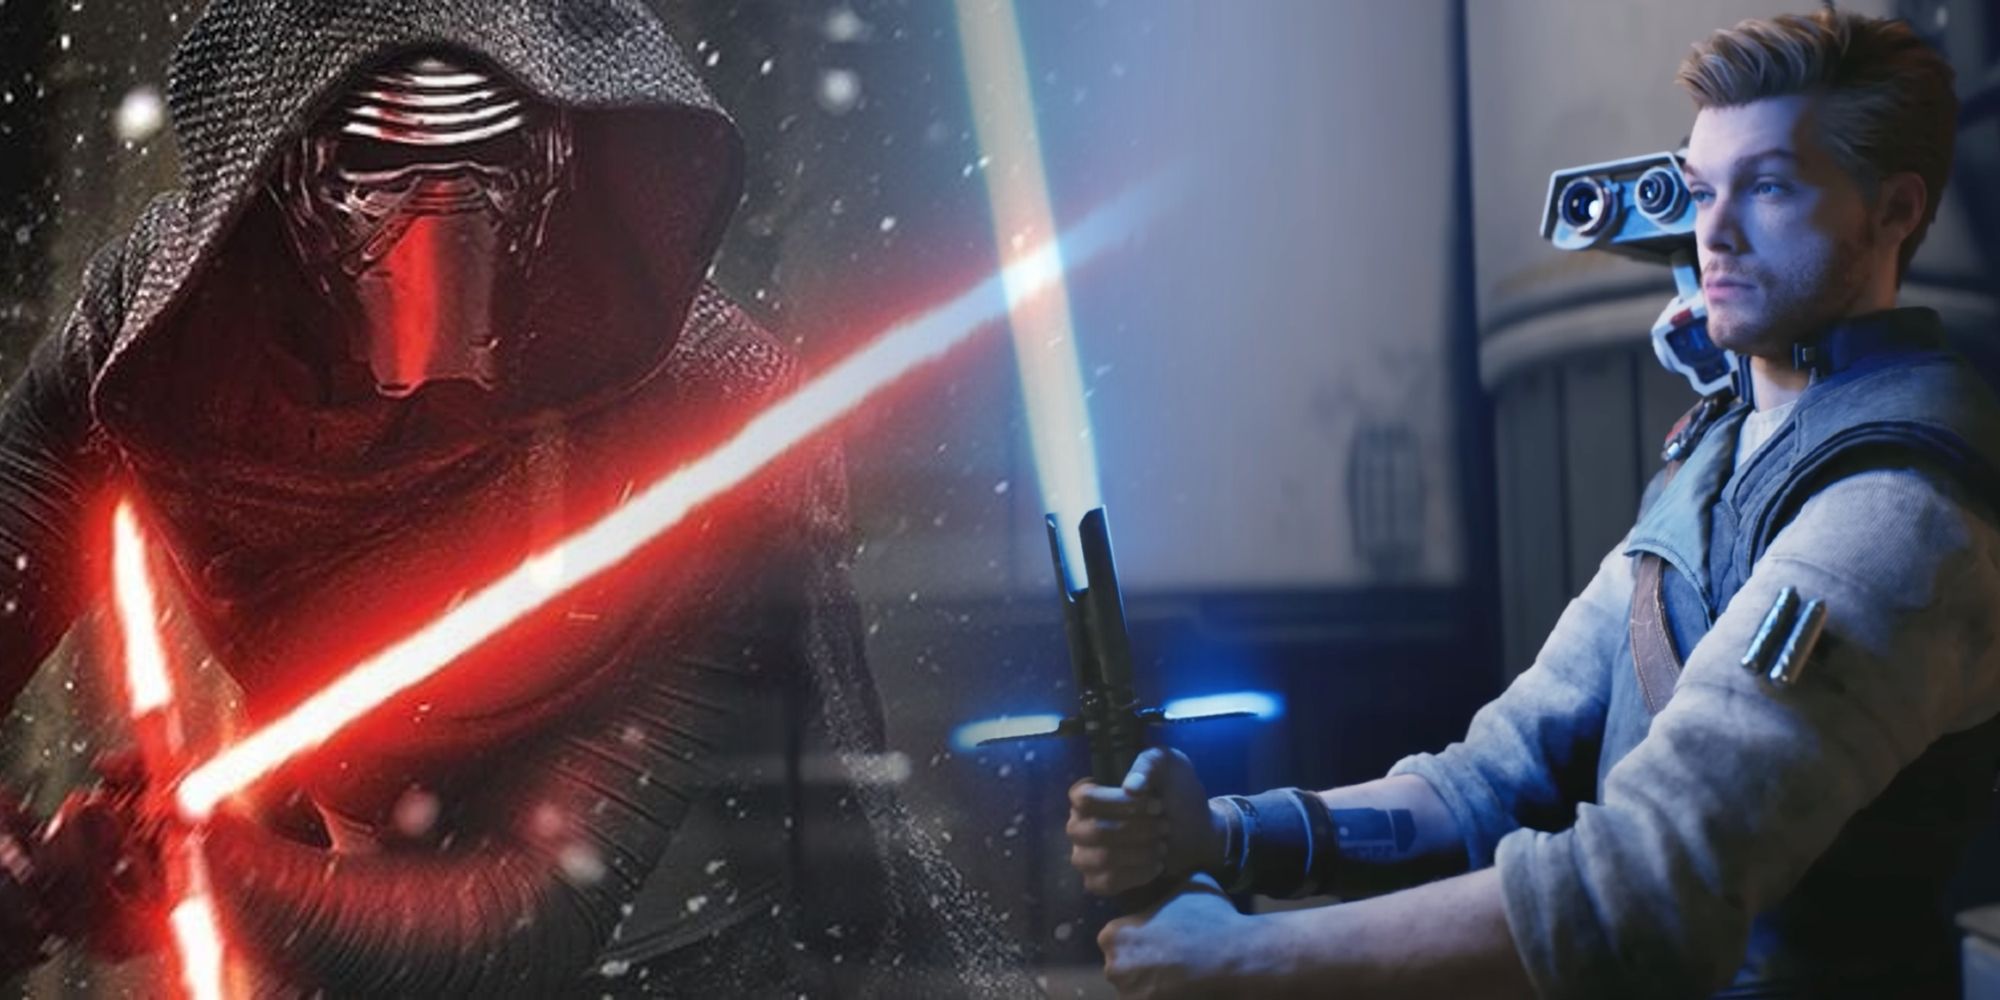 Image of a masked Kylo Ren wielding his red crossguard lightsaber, pictured next to Cal Kestis igniting his blue crossguard lightsaber.